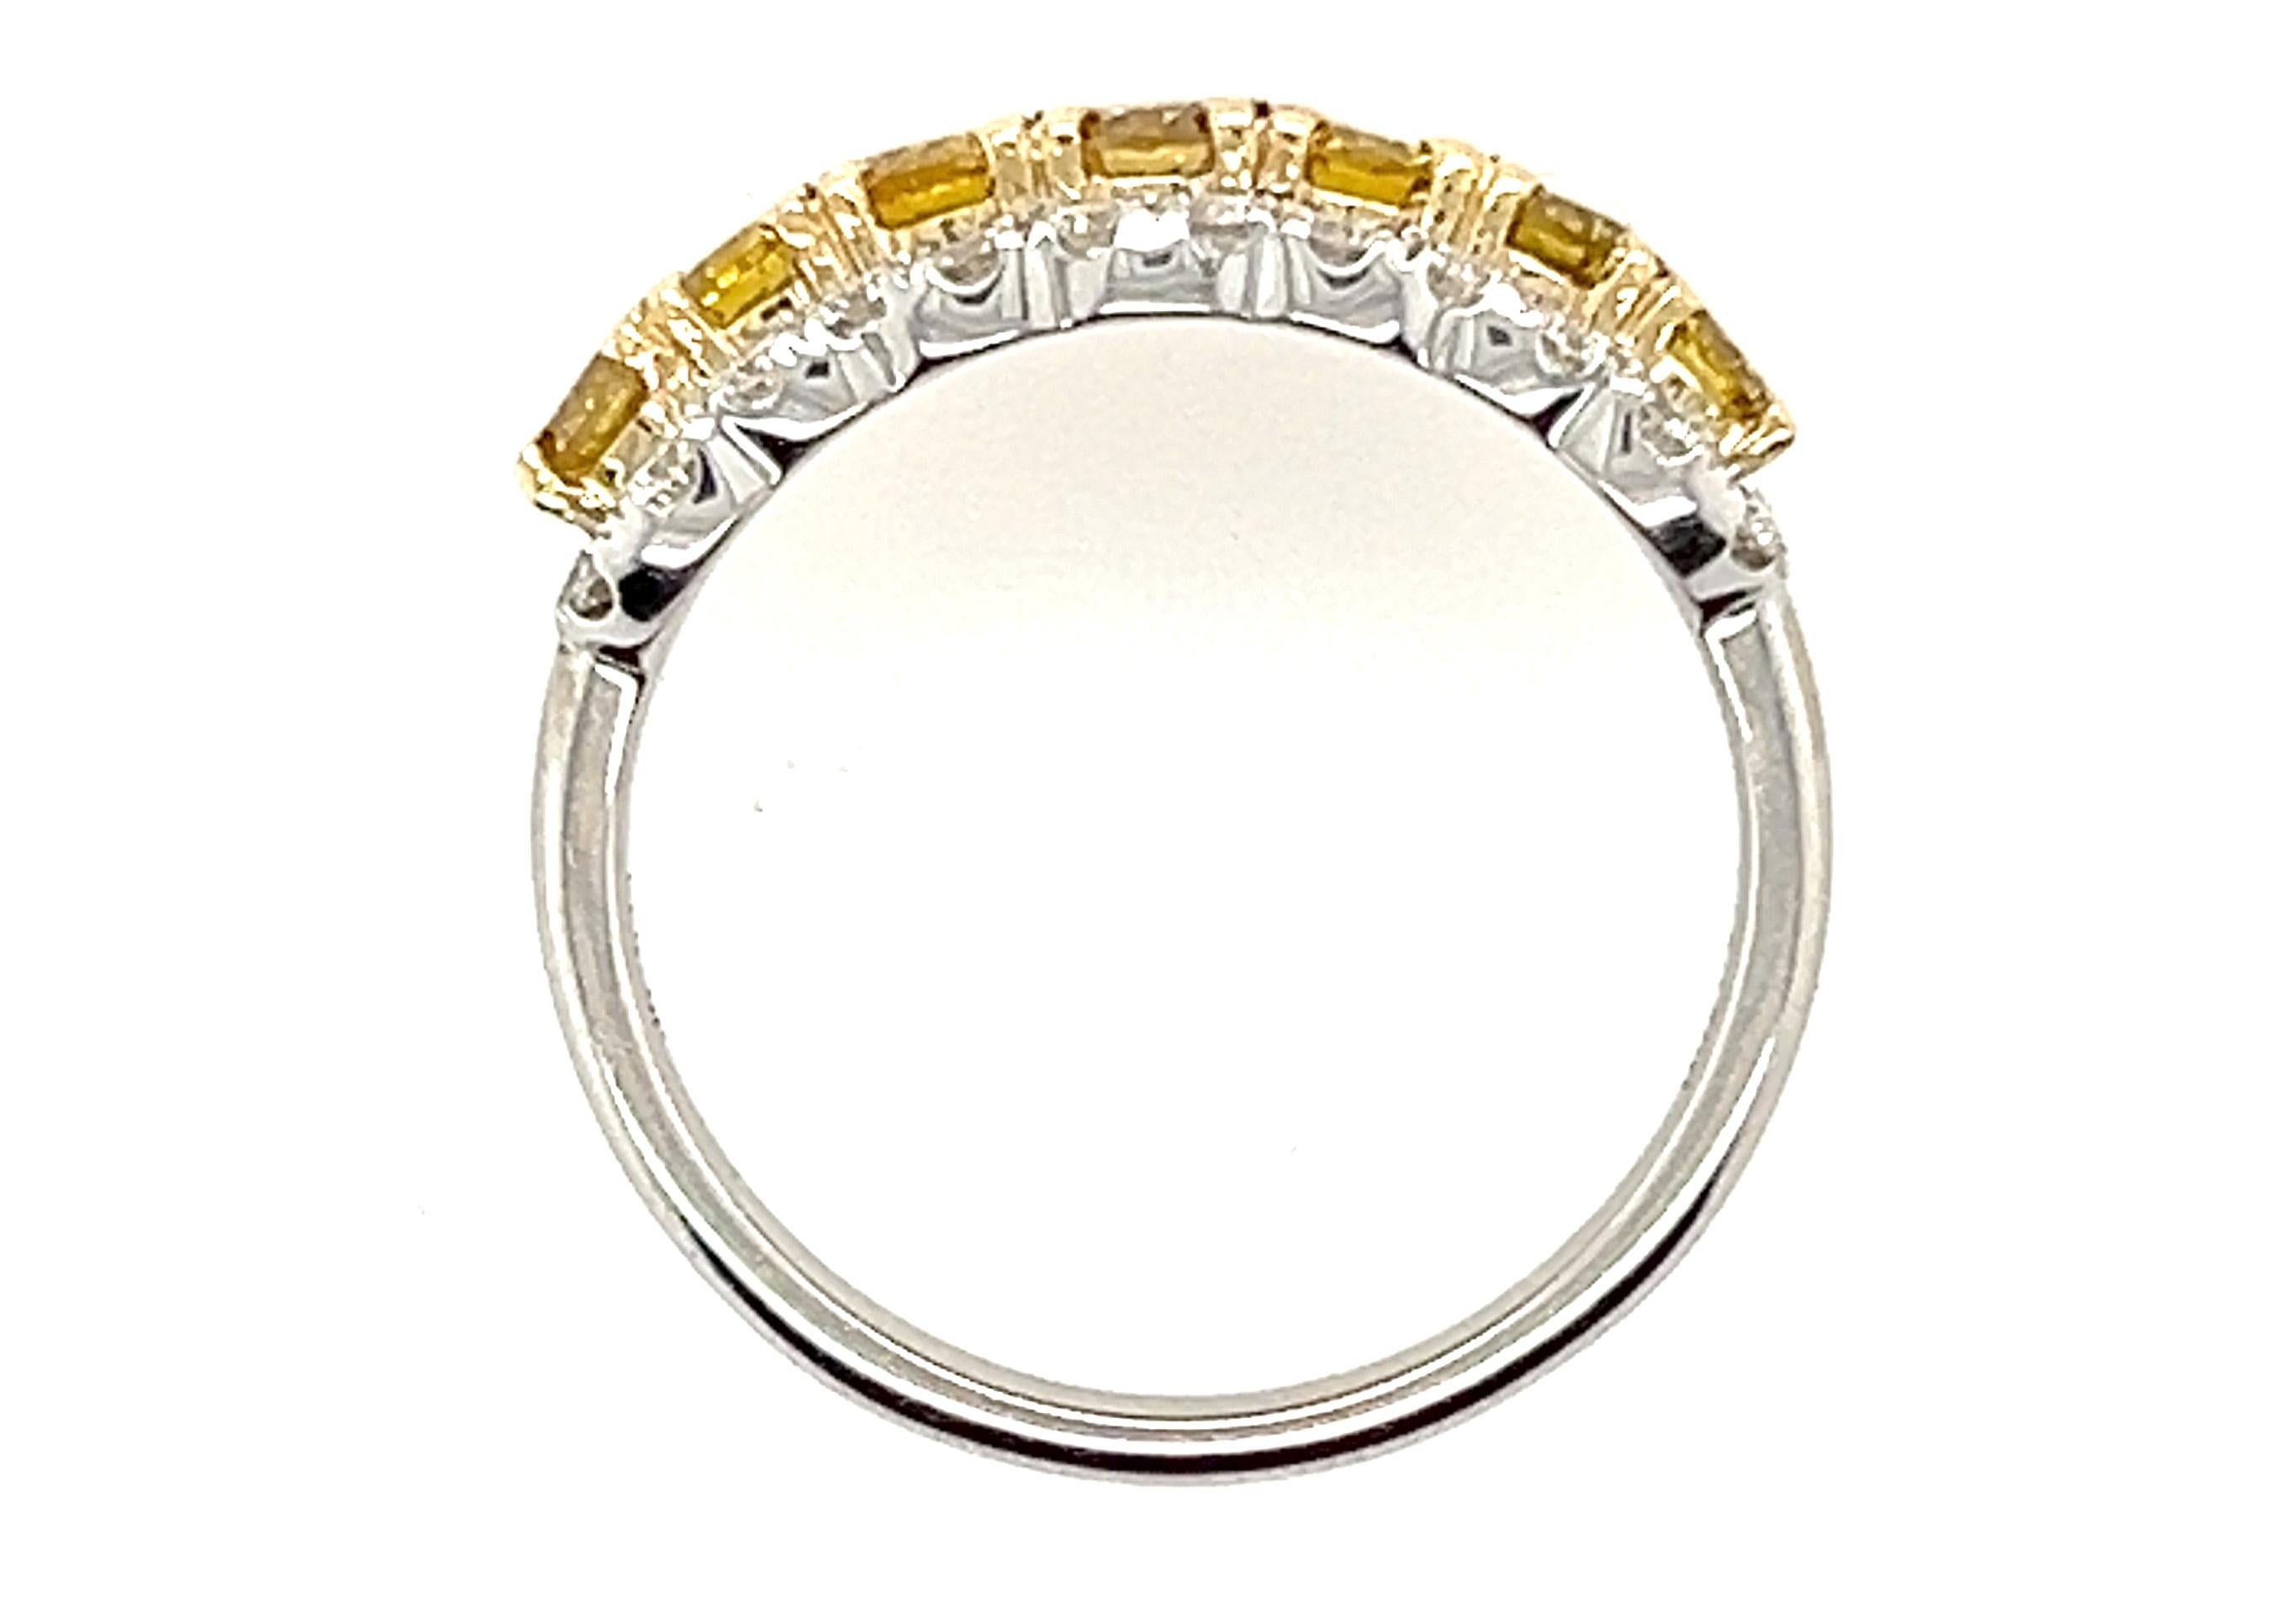 Natural Fancy Vivid Deep Orangy Yellow 1.38ct Diamond Anniversary Ring 18K White Gold


Featuring 7 Matching Natural Mined Fancy Vivid Deep Orangy Yellow Round Brilliant Cut Diamonds

Natural Fancy Orange Diamonds are Not Only Rare but More